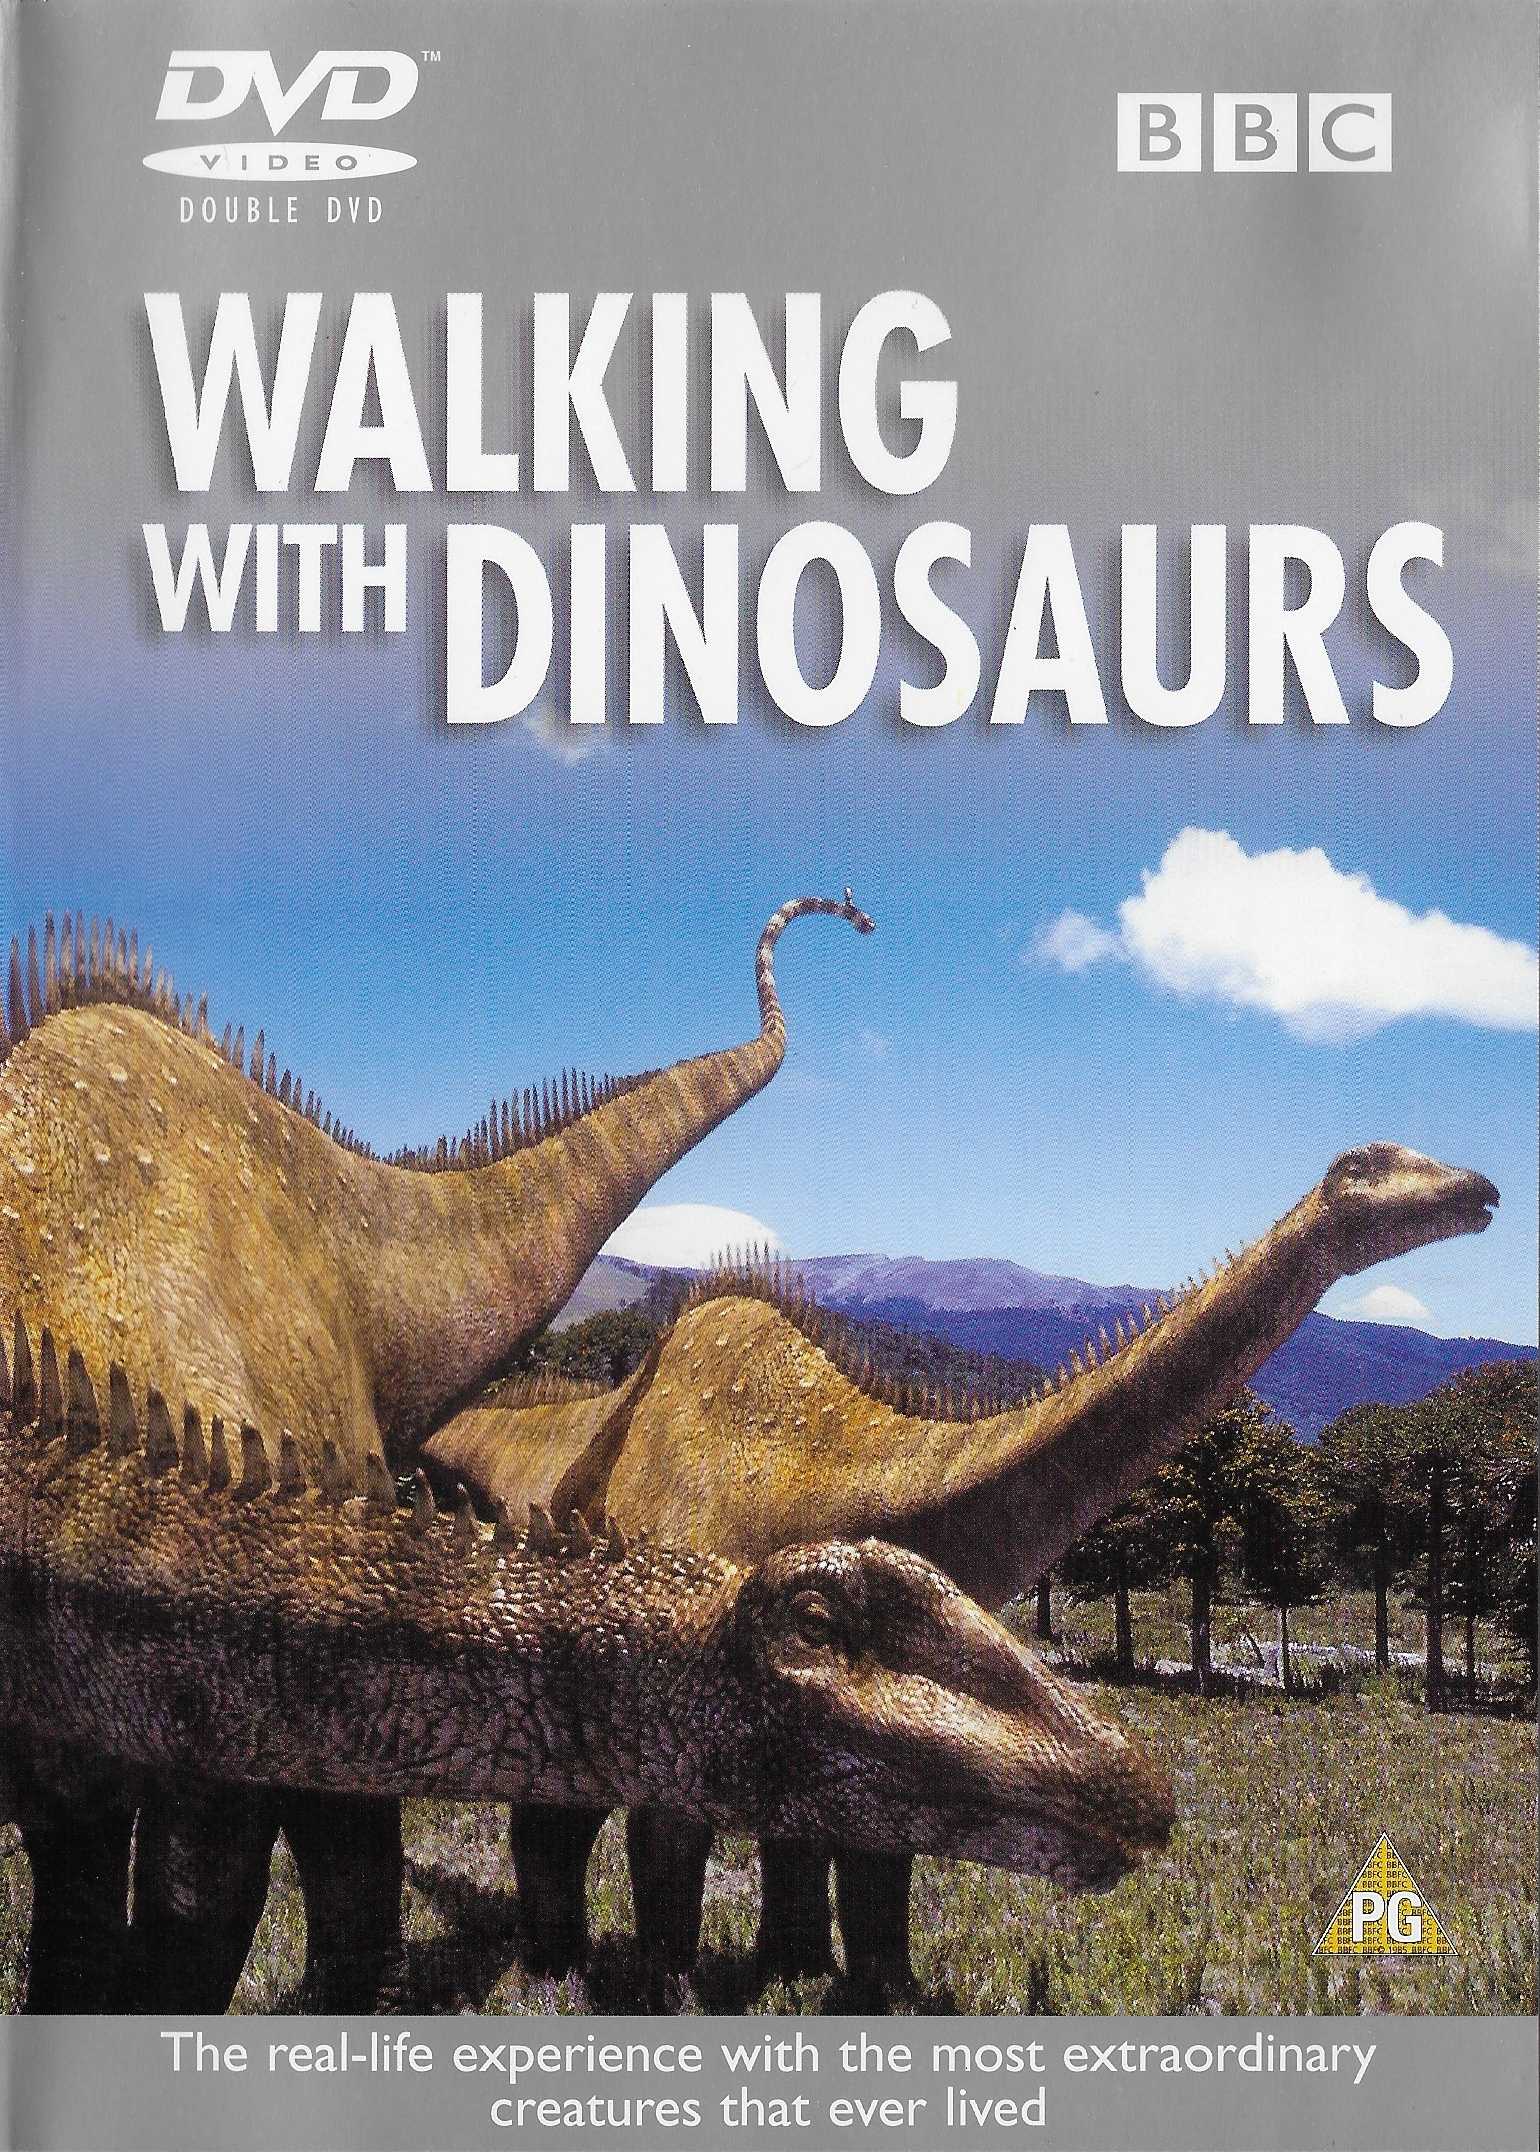 Picture of BBCDVD 1016 Walking with dinosaurs by artist Kenneth Branagh from the BBC dvds - Records and Tapes library